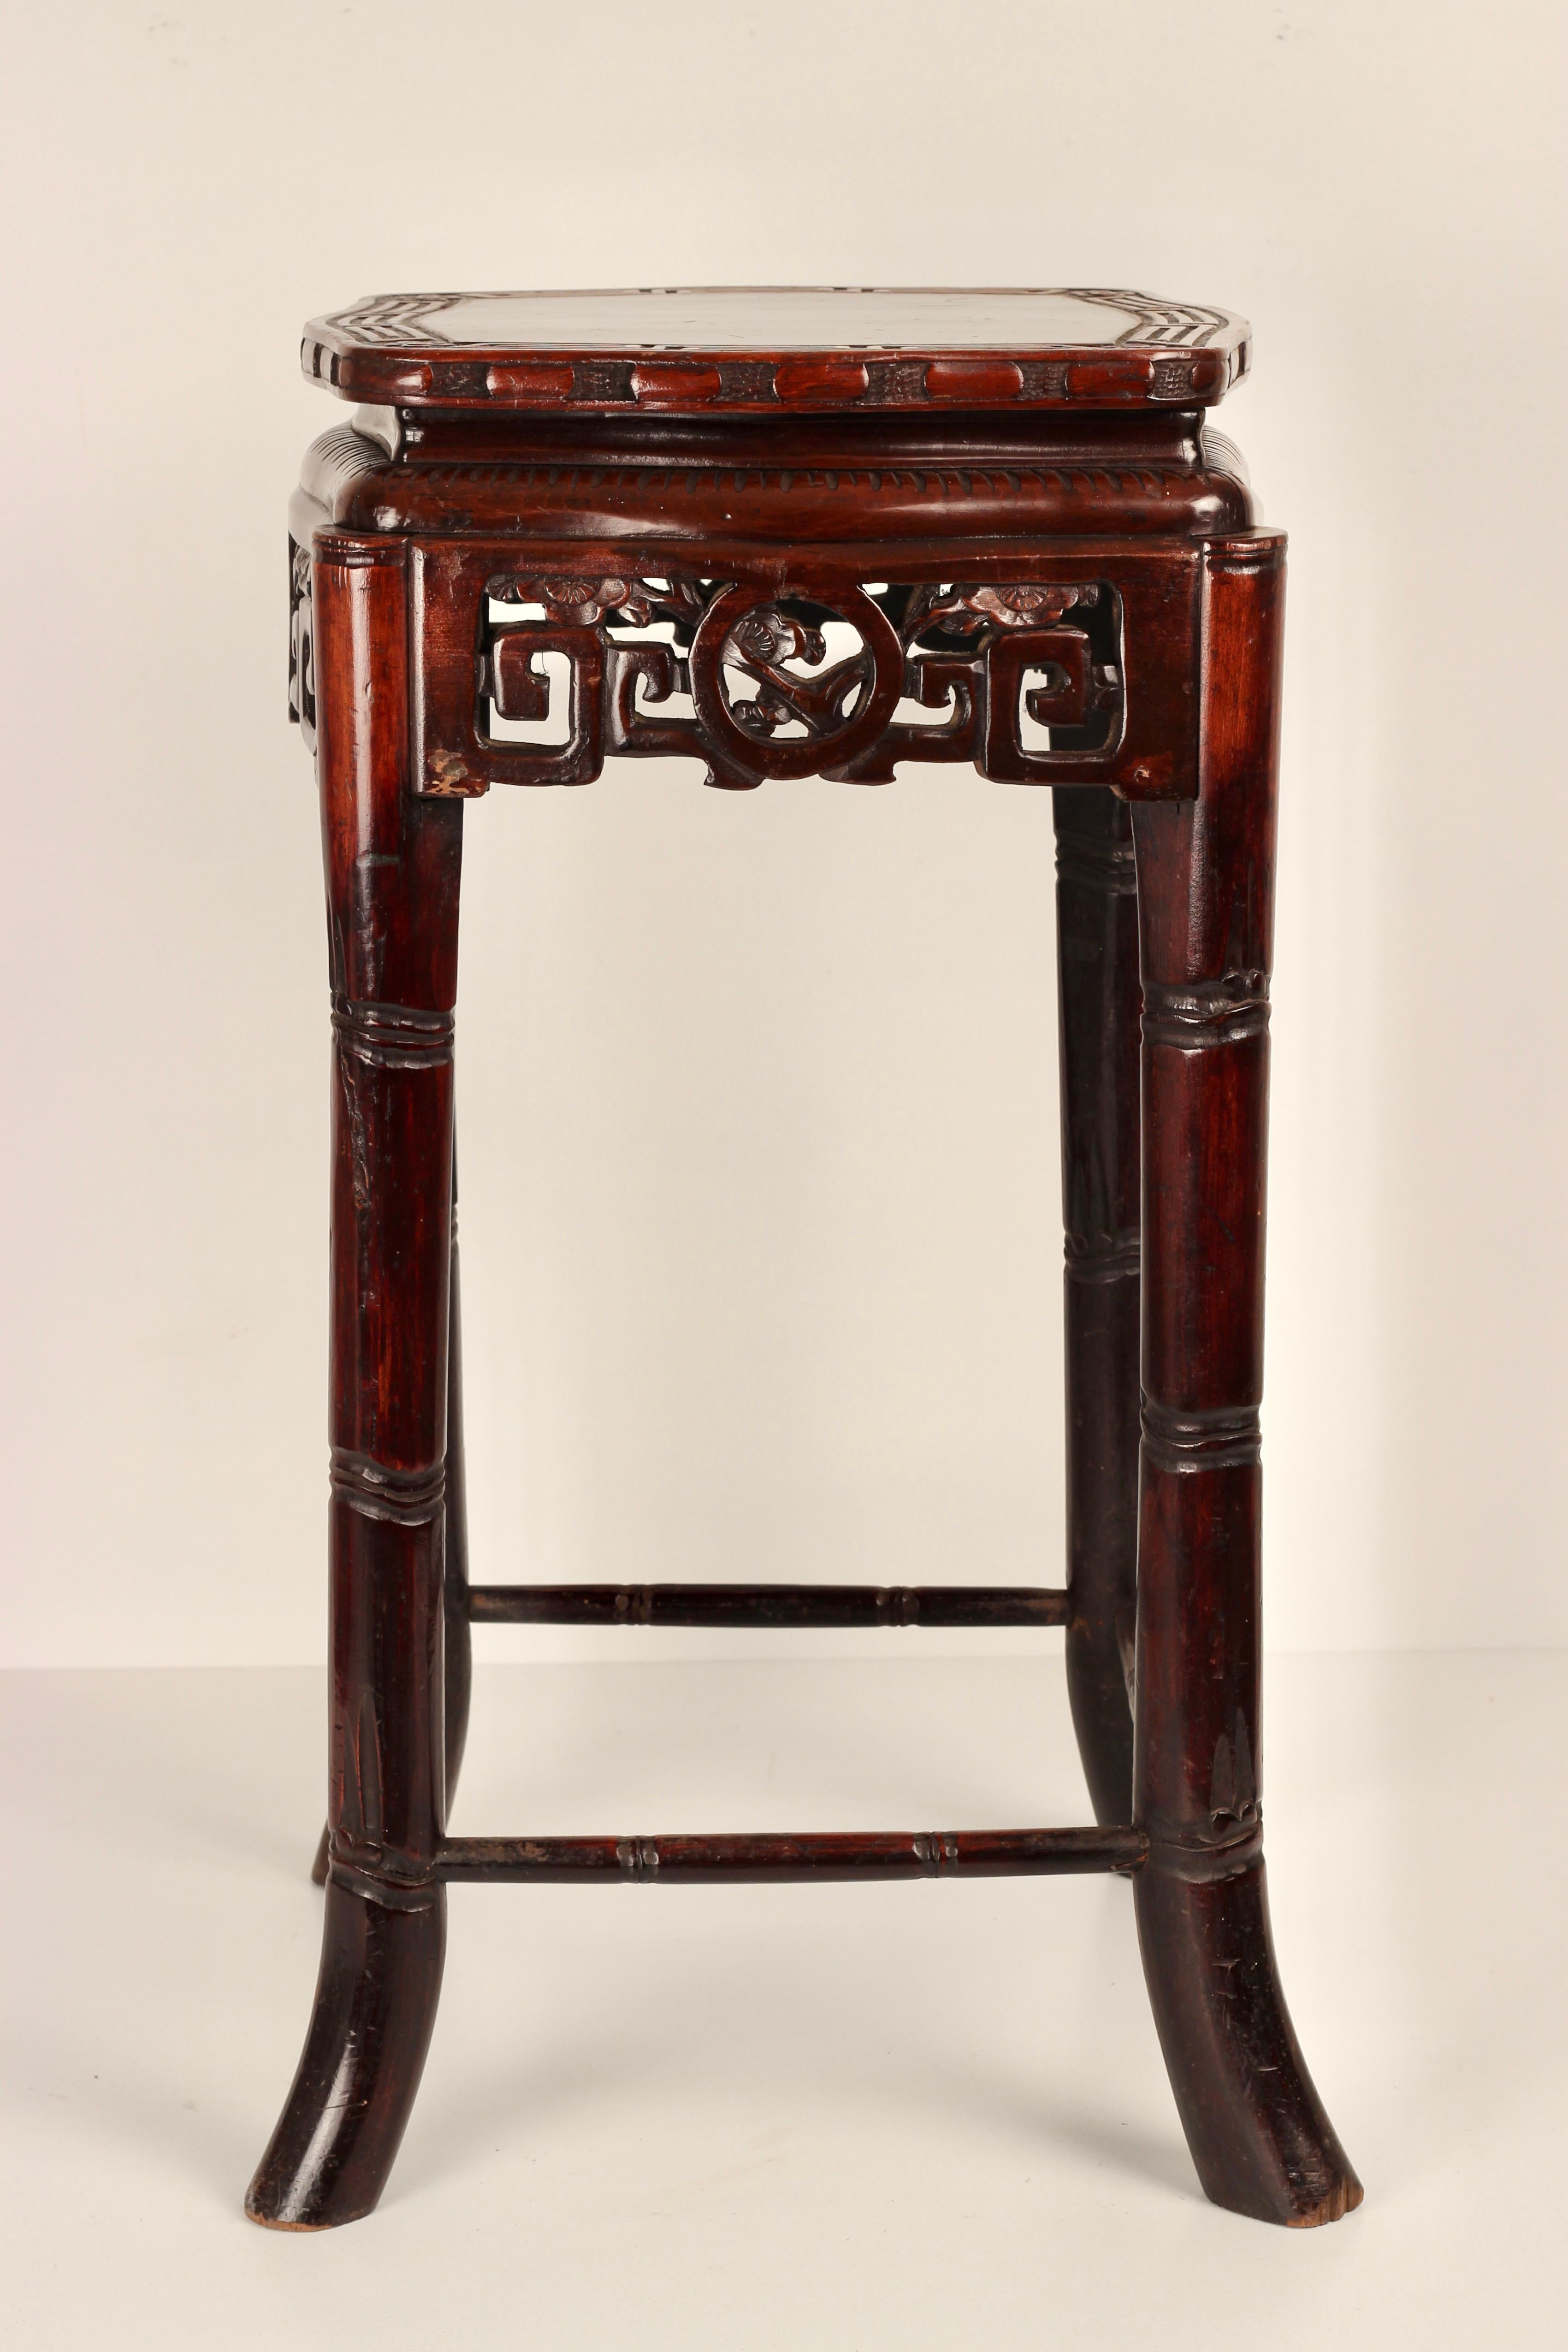 A Mid 19th century Faux Bamboo Tourchere in the Chinese style made from wood with a Rosewood colour stain finish. 

Around the middle of the 19th Century Chinoiserie came back into fashion with the Rococo Revival. This piece would work well in an